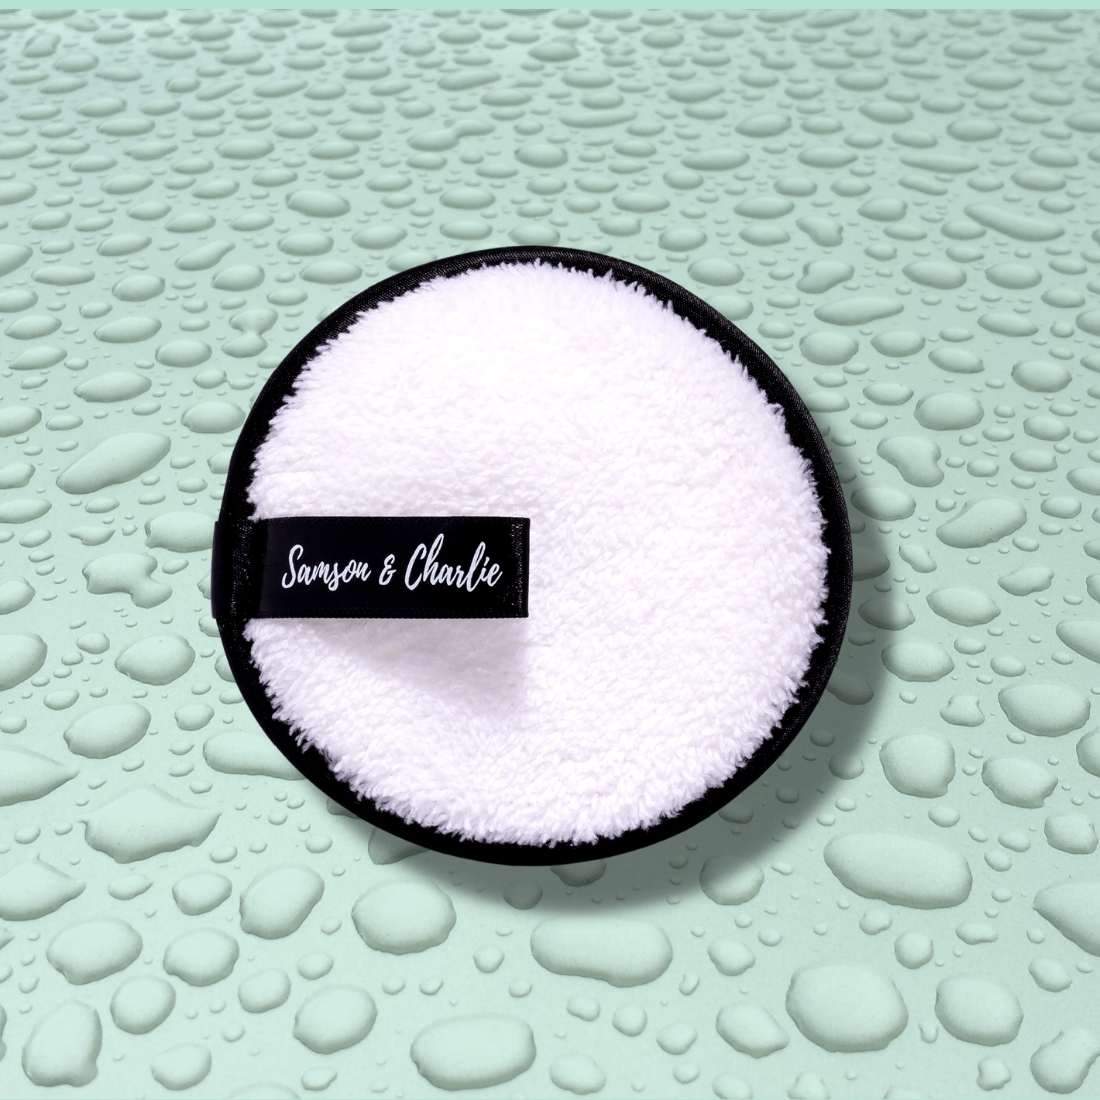 Samson & Charlie Make-Up Remover Pads Reusable Makeup Remover Cleansing Pad